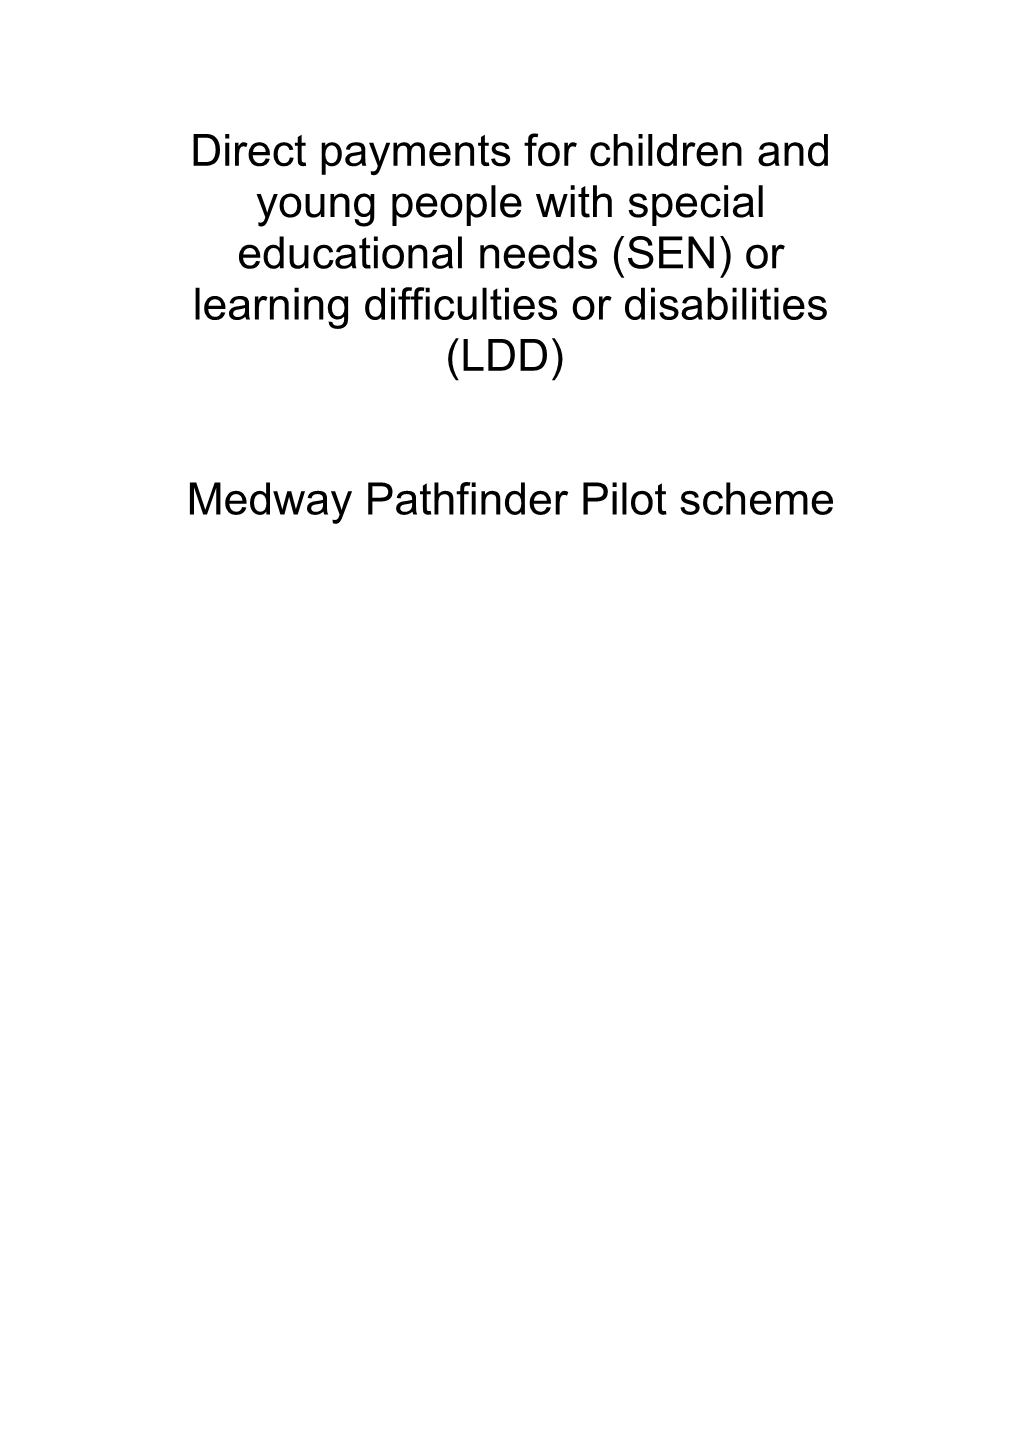 Direct Payments for Children and Young People with Special Educational Needs (SEN) Or Learning